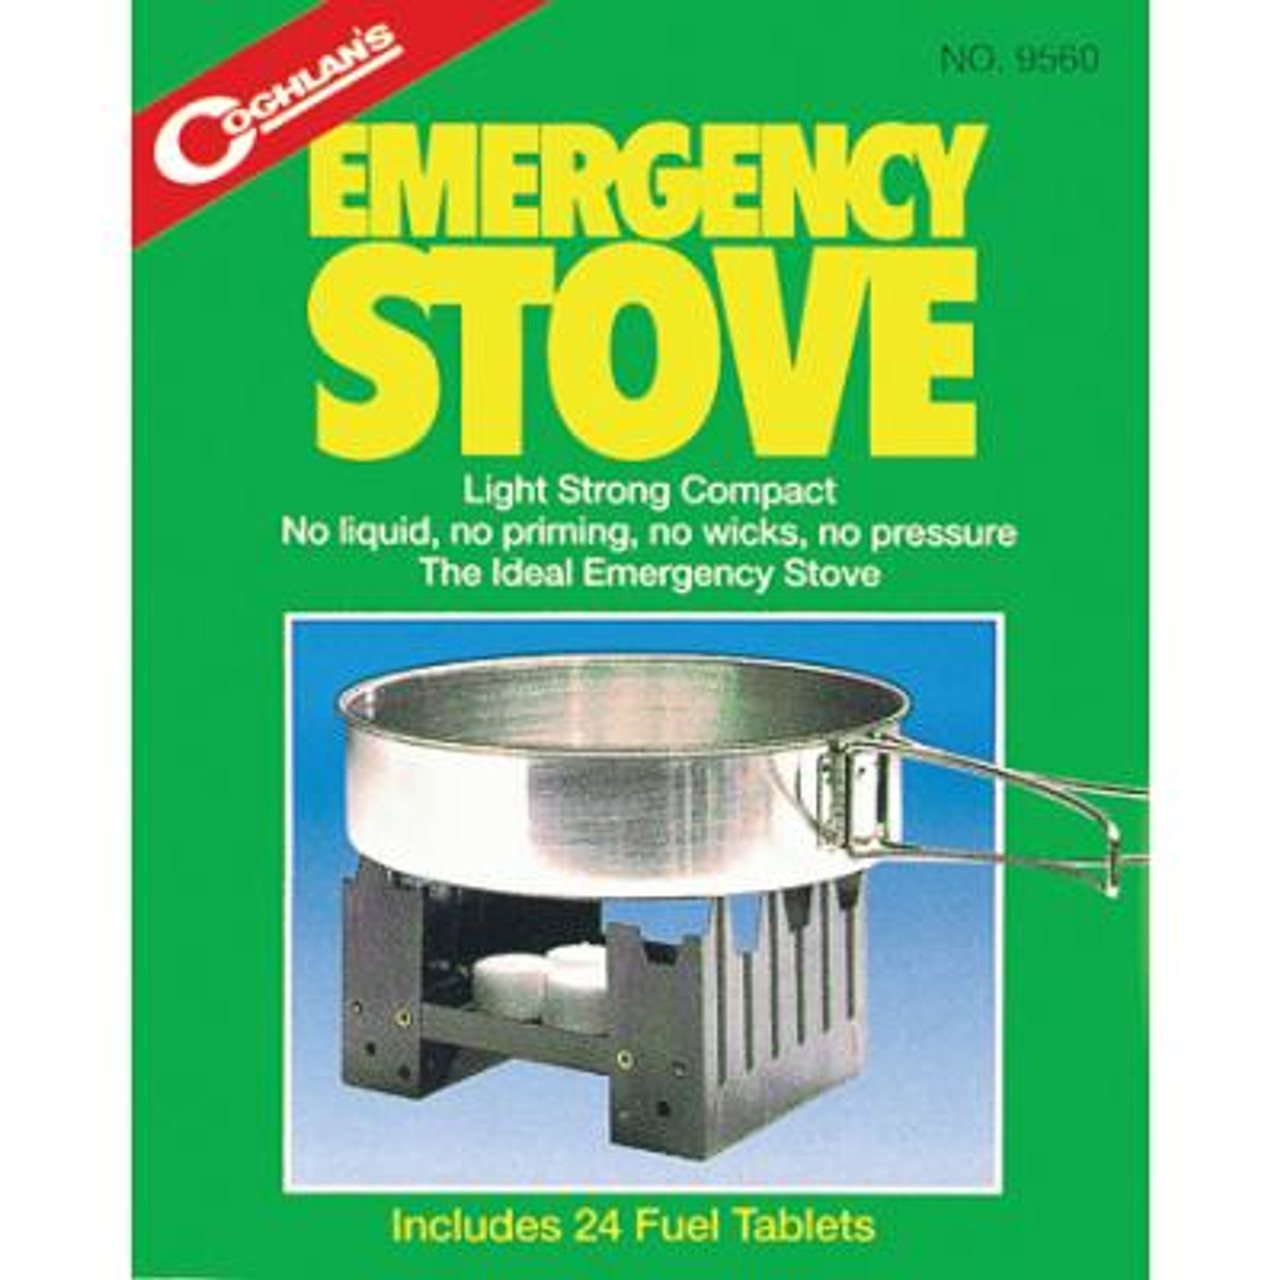 Coghlan's Emergency Stove Includes 24 Fuel Tablets